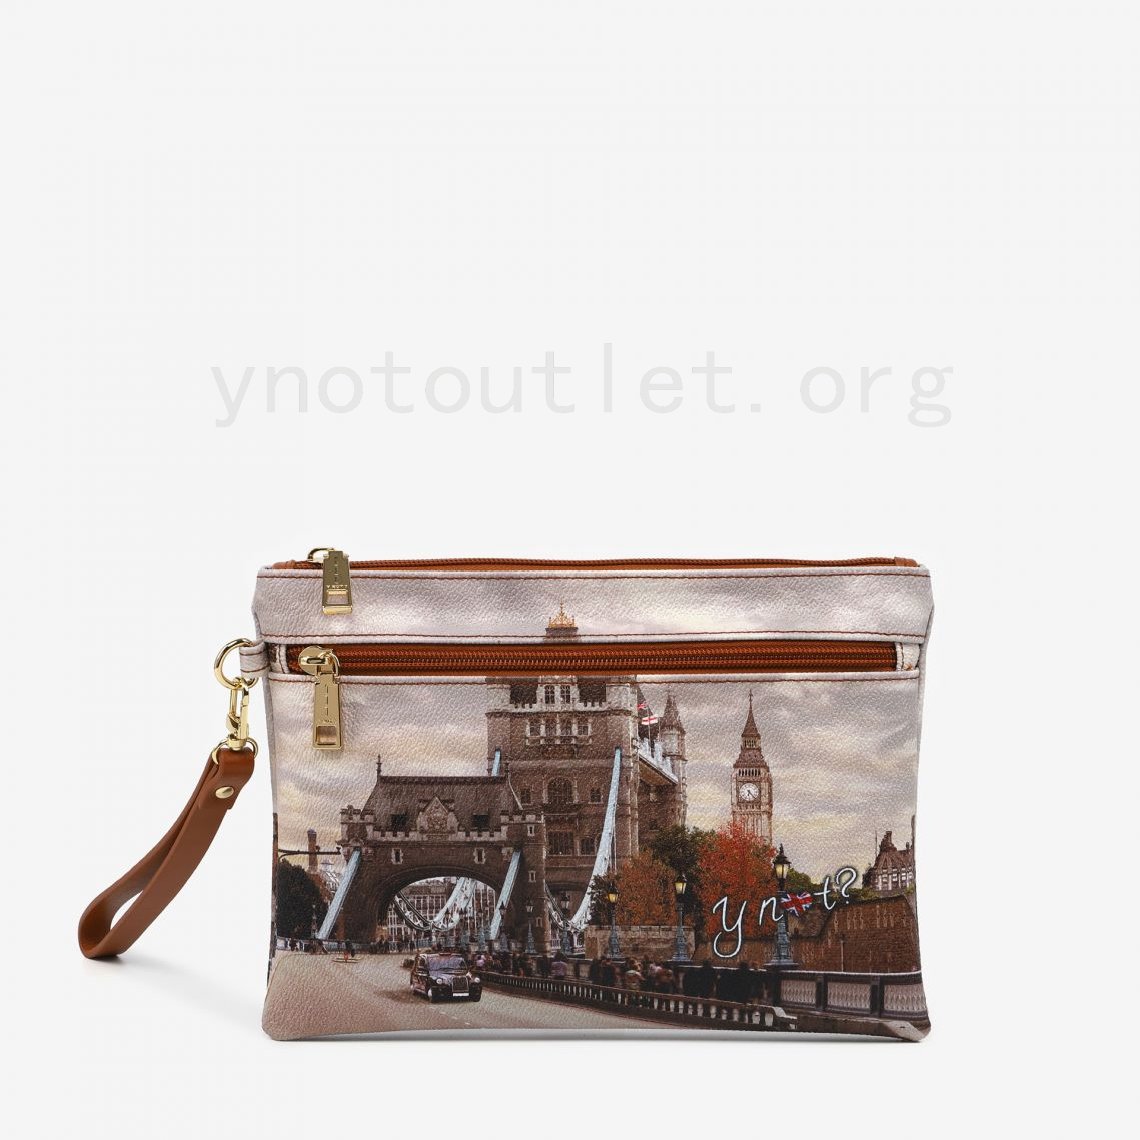 y not outlet Pocket With Handle Medium London Taxi Negozio Ufficiale